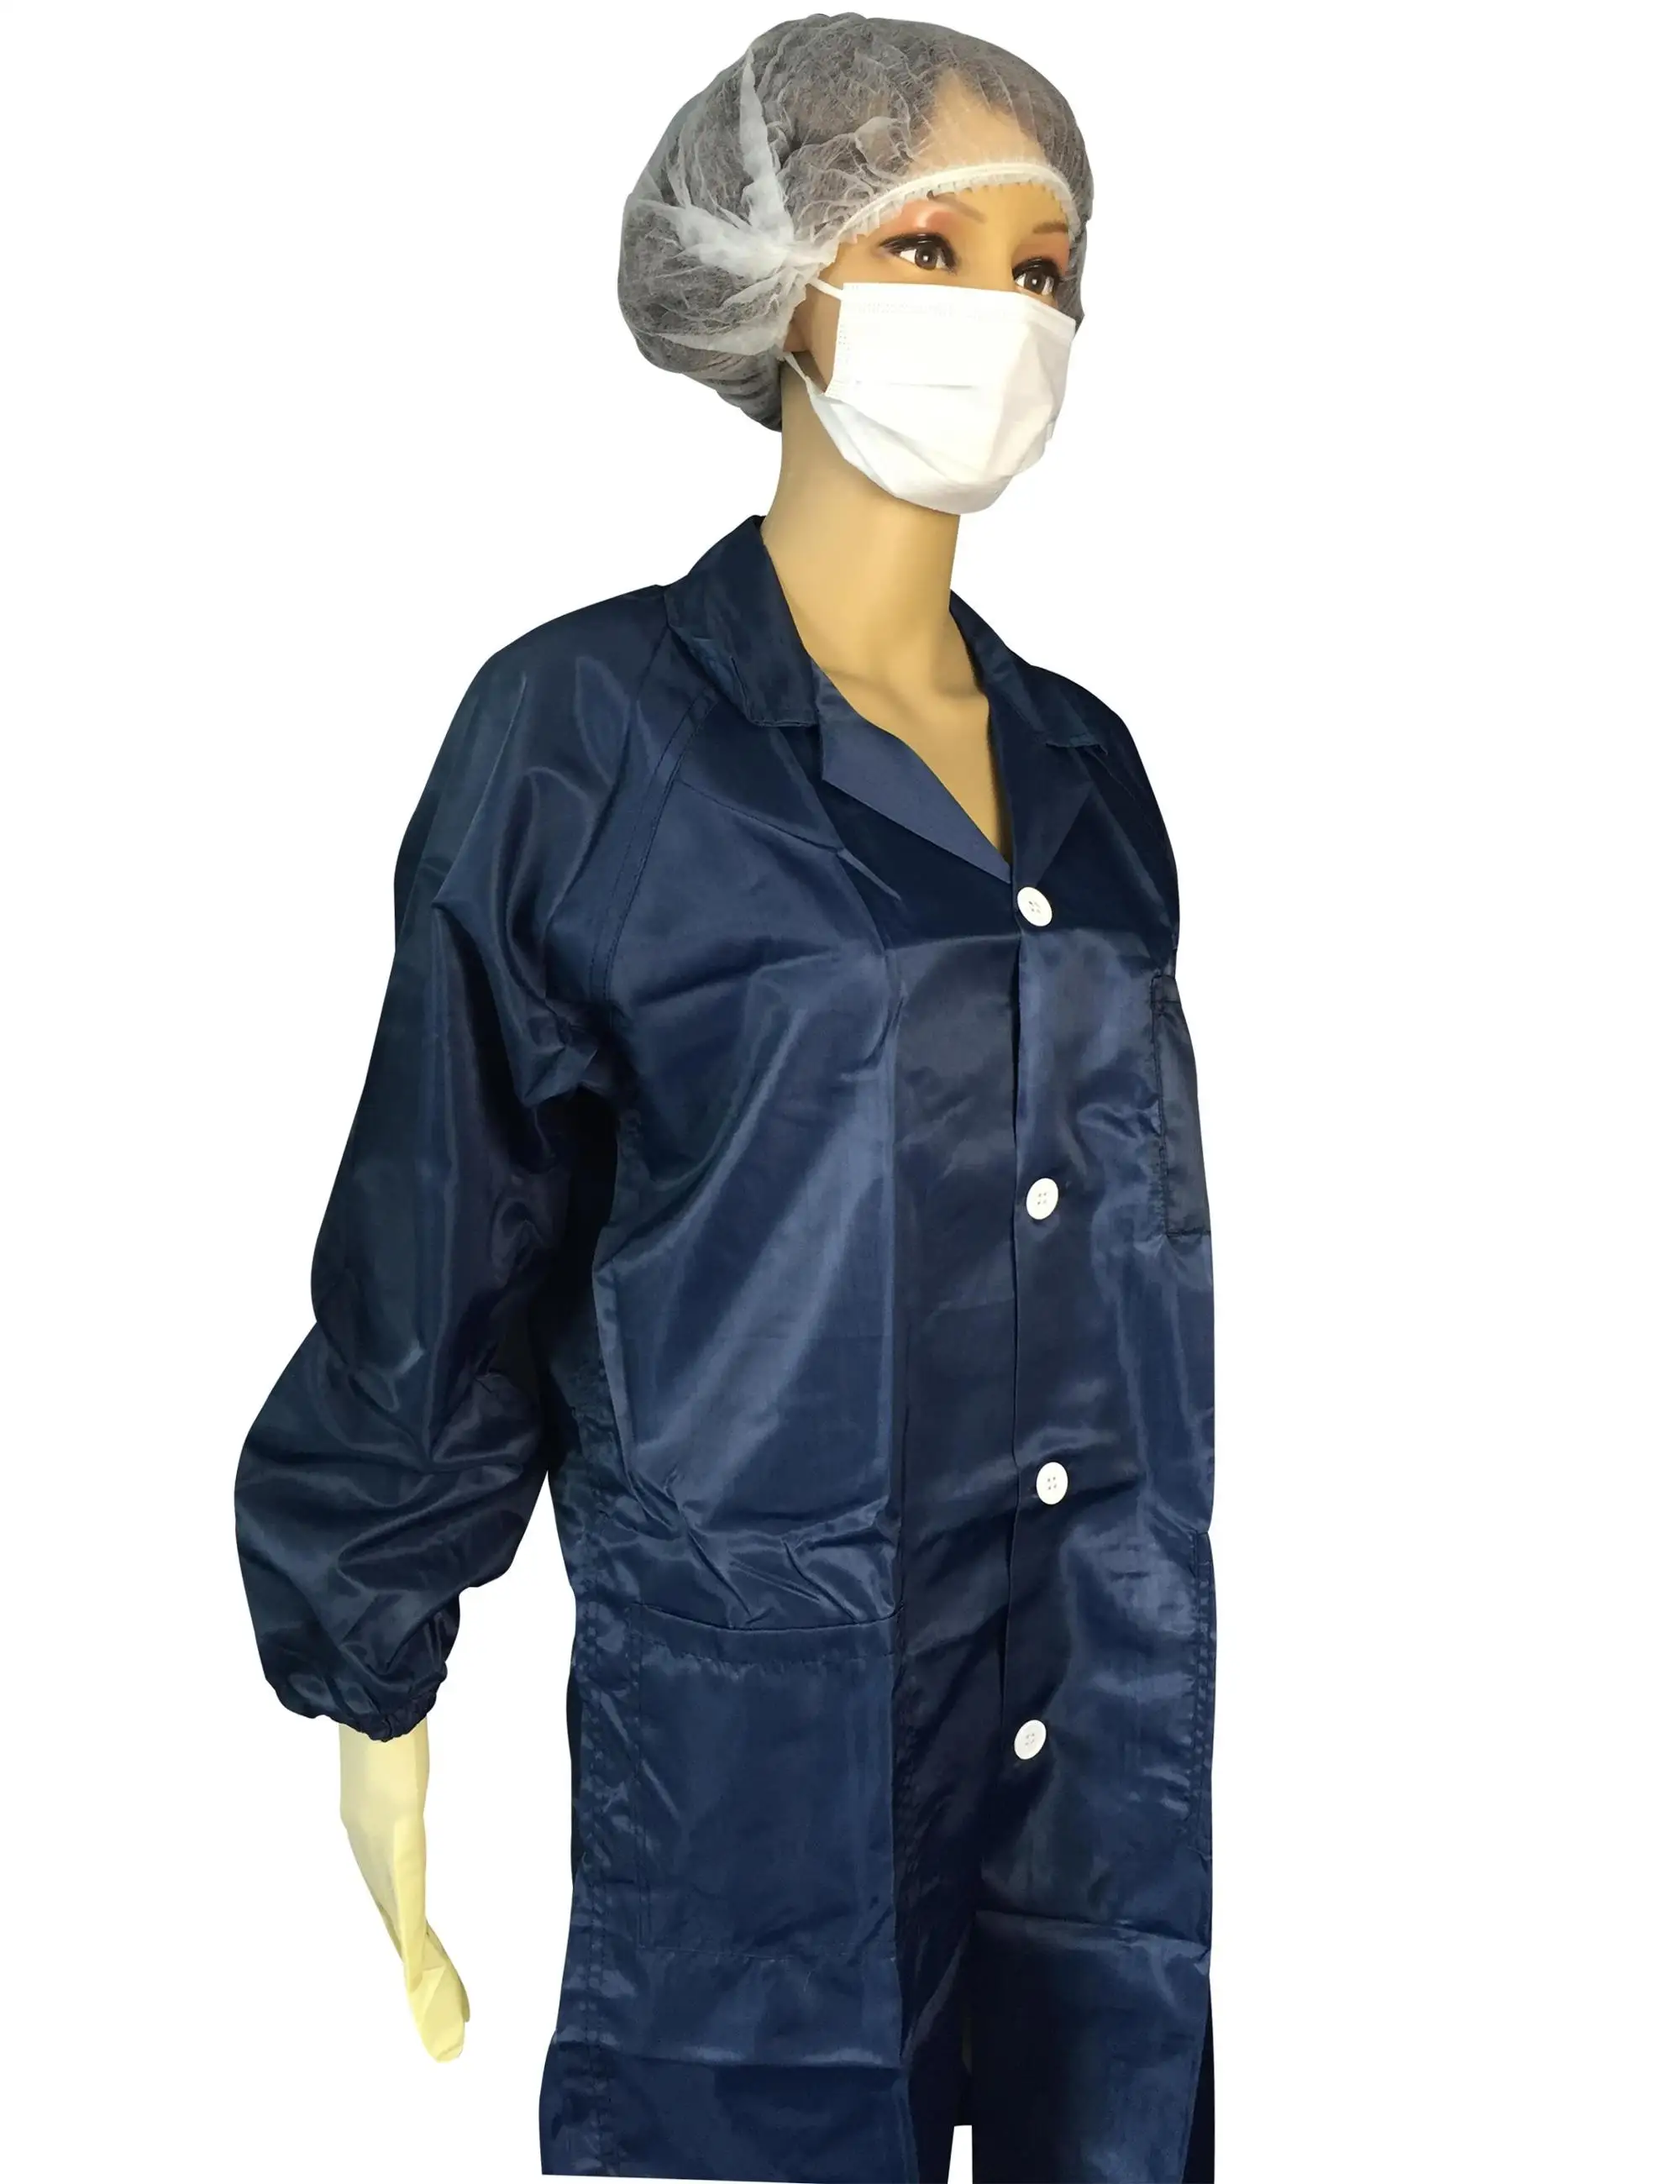 
Best Prices Manufacturer 5mm Stripe ESD Smock Gown for Cleanroom Workwear 